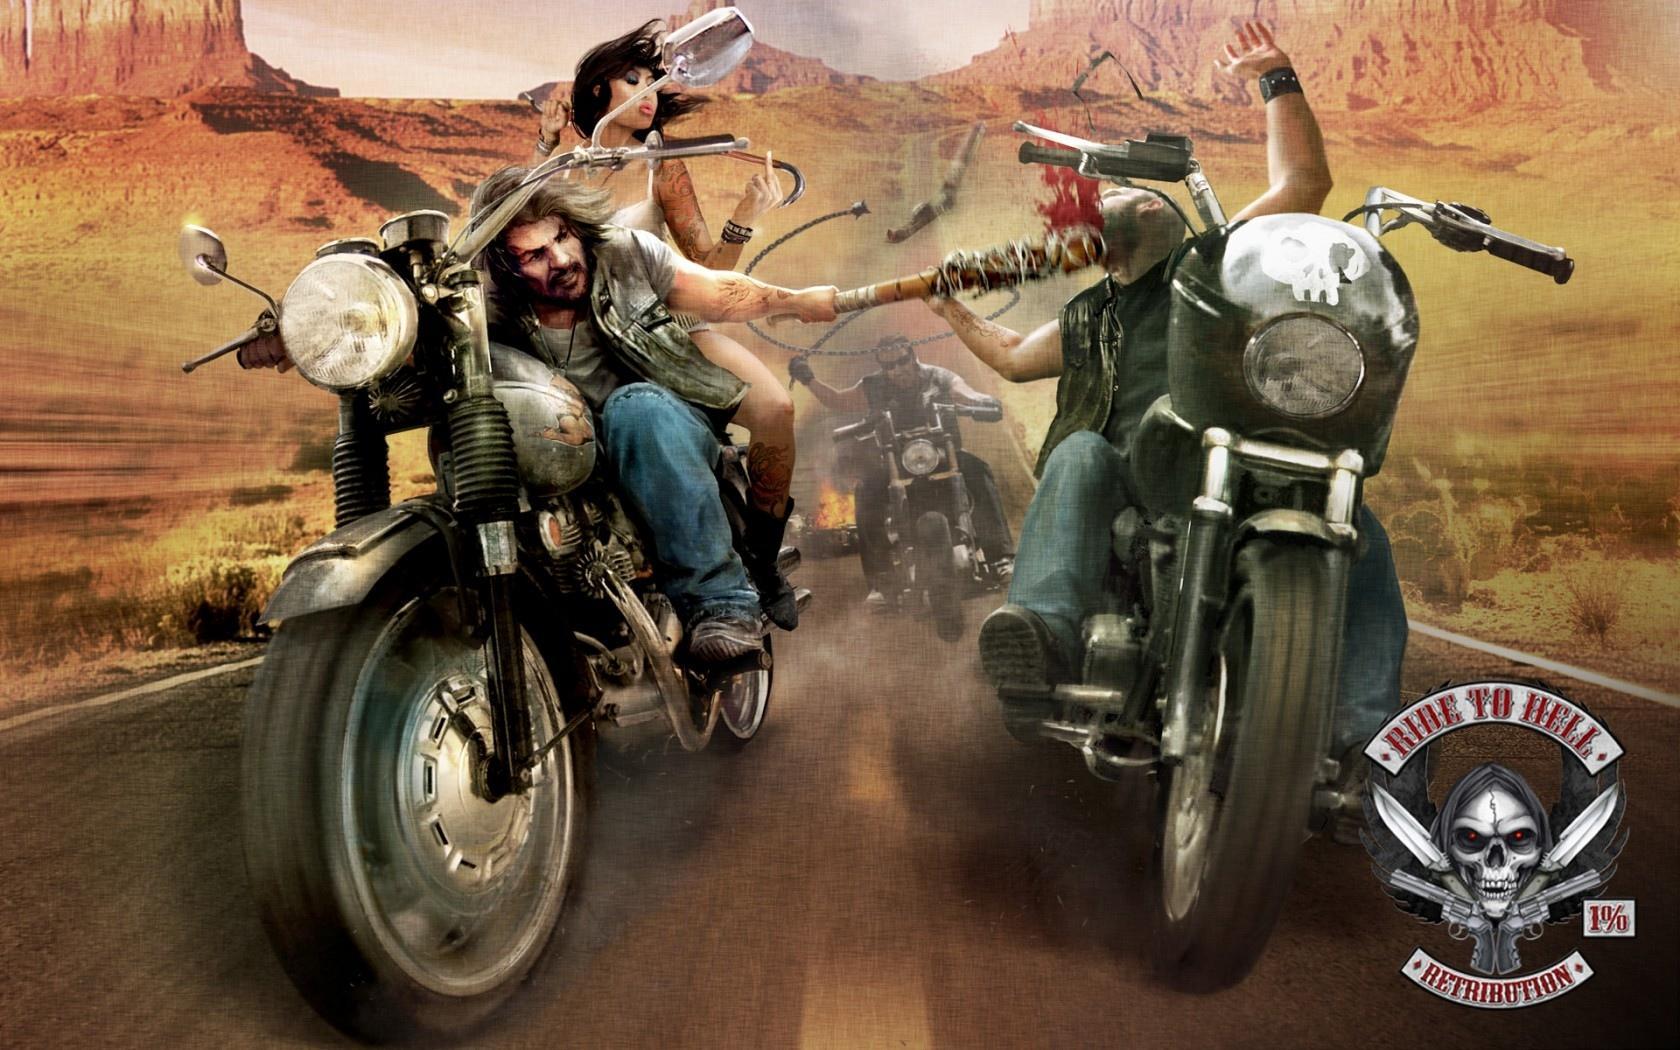 Easy Rider Wallpaper, image collections of wallpaper